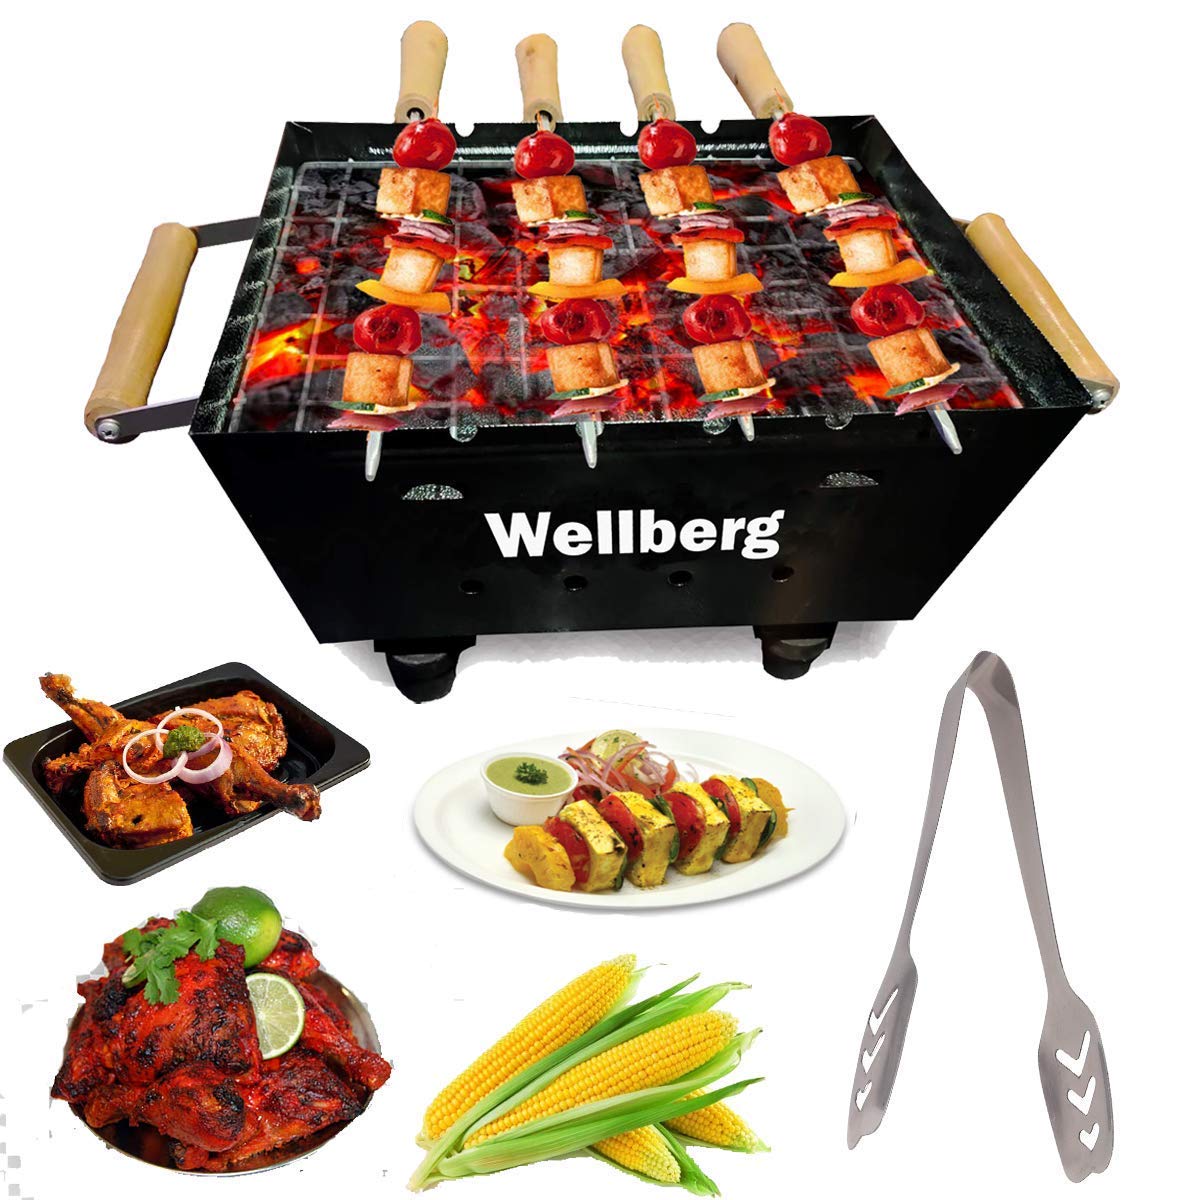 Wellberg Charcoal Grill Barbecue Charcoal barbecue grill online in India